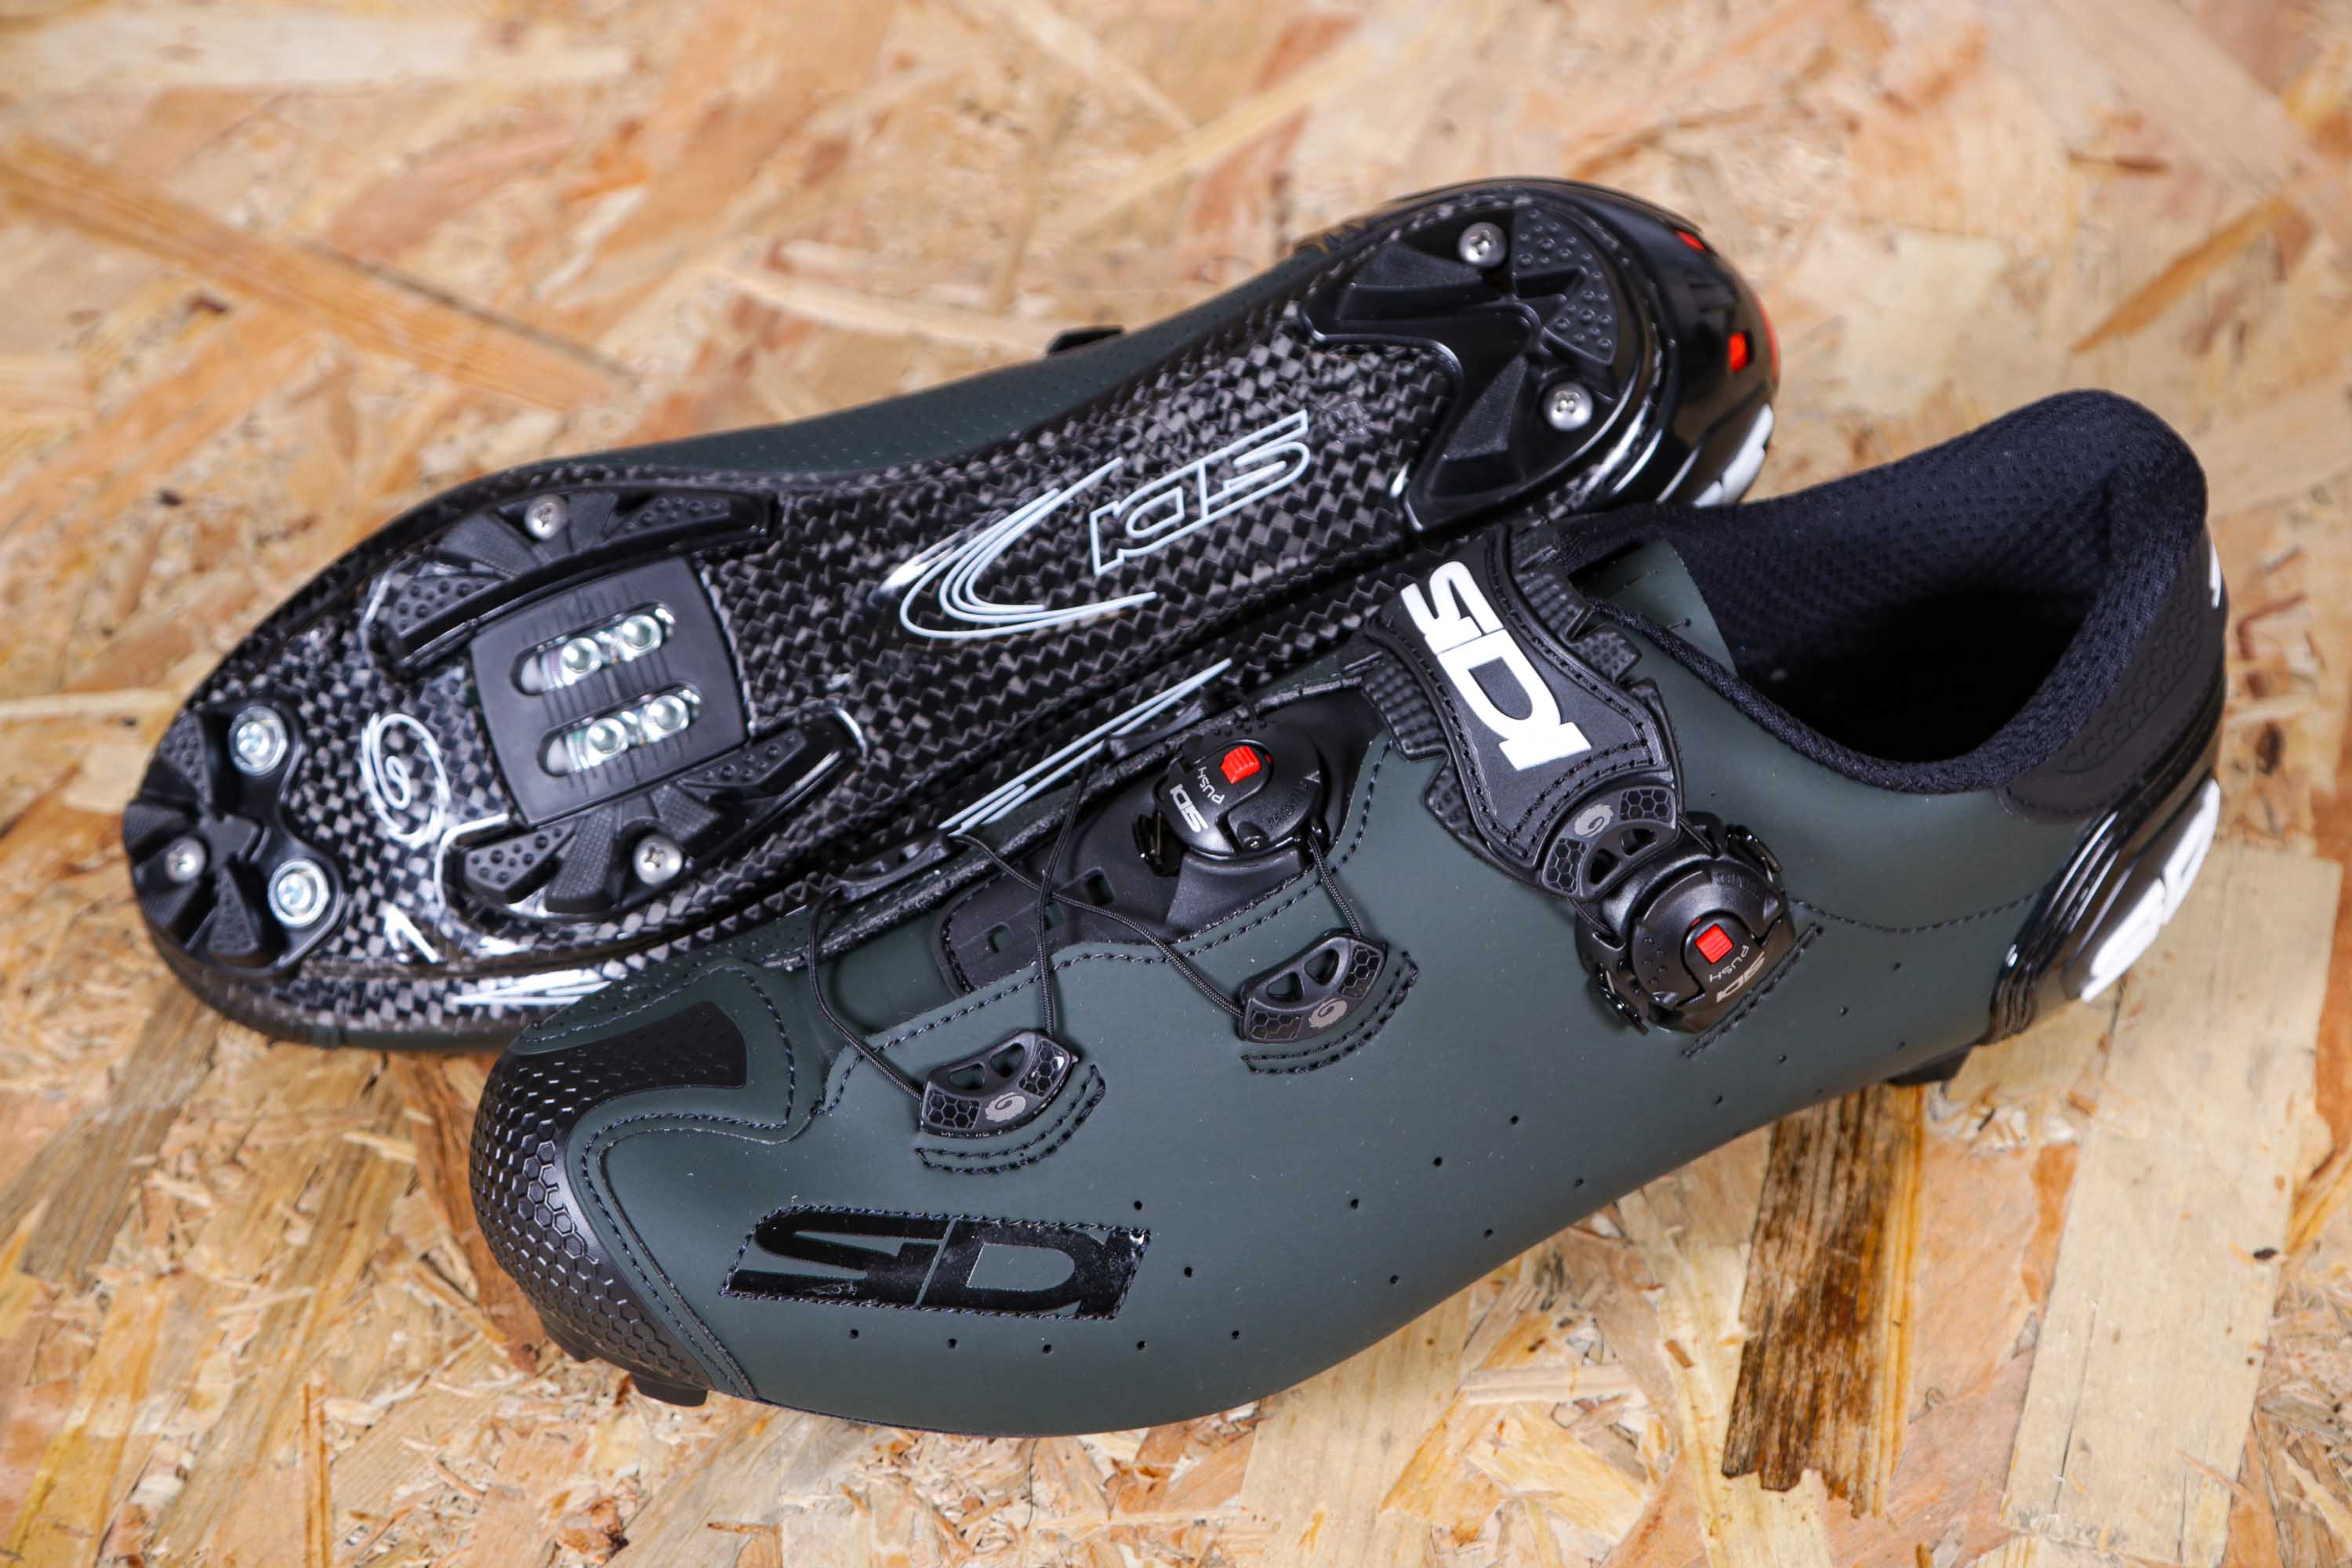 tempo official Profession Review: Sidi Jarin MTB Gravel Cycling Shoes | road.cc